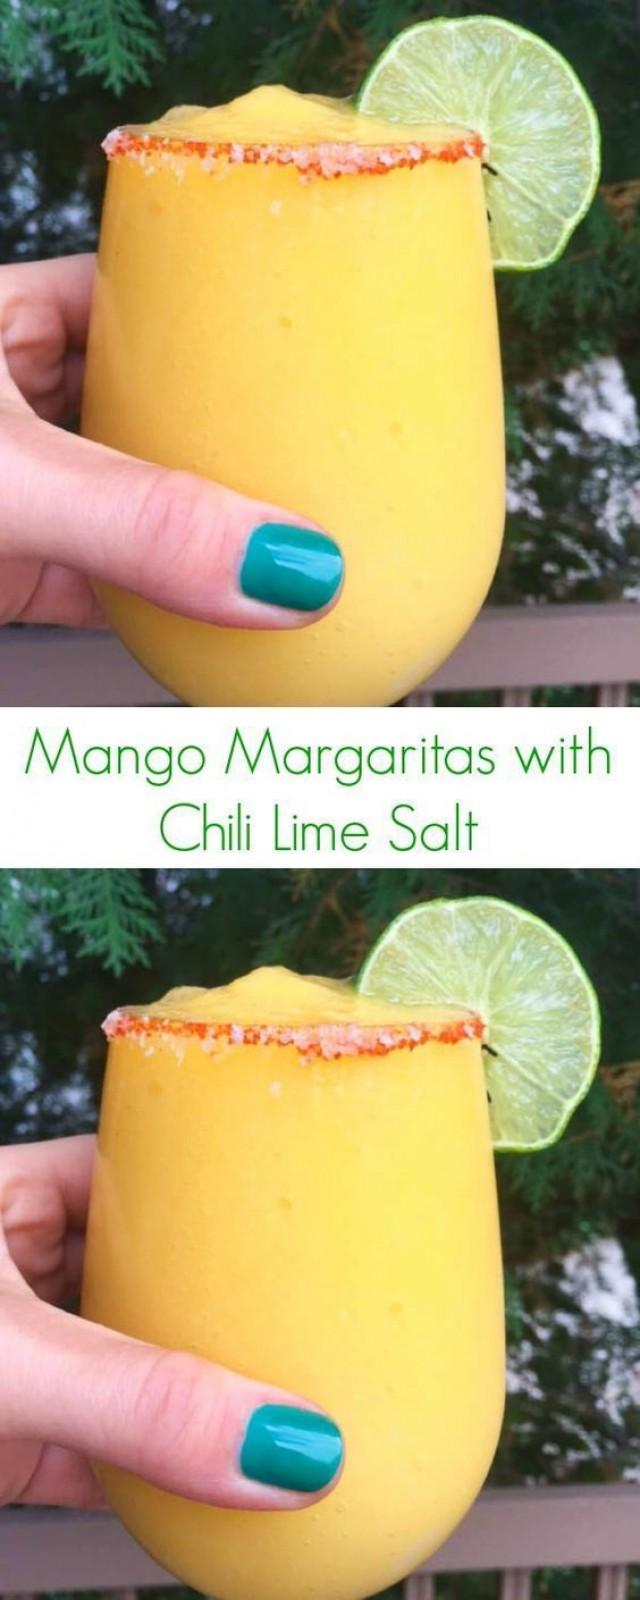 Mango Margaritas With Chili Lime Salt Recipe - The Perfect Combination Of Sweet, Spicy, And Tangy In A Easy Holiday Cocktail! - The Lemon Bowl 